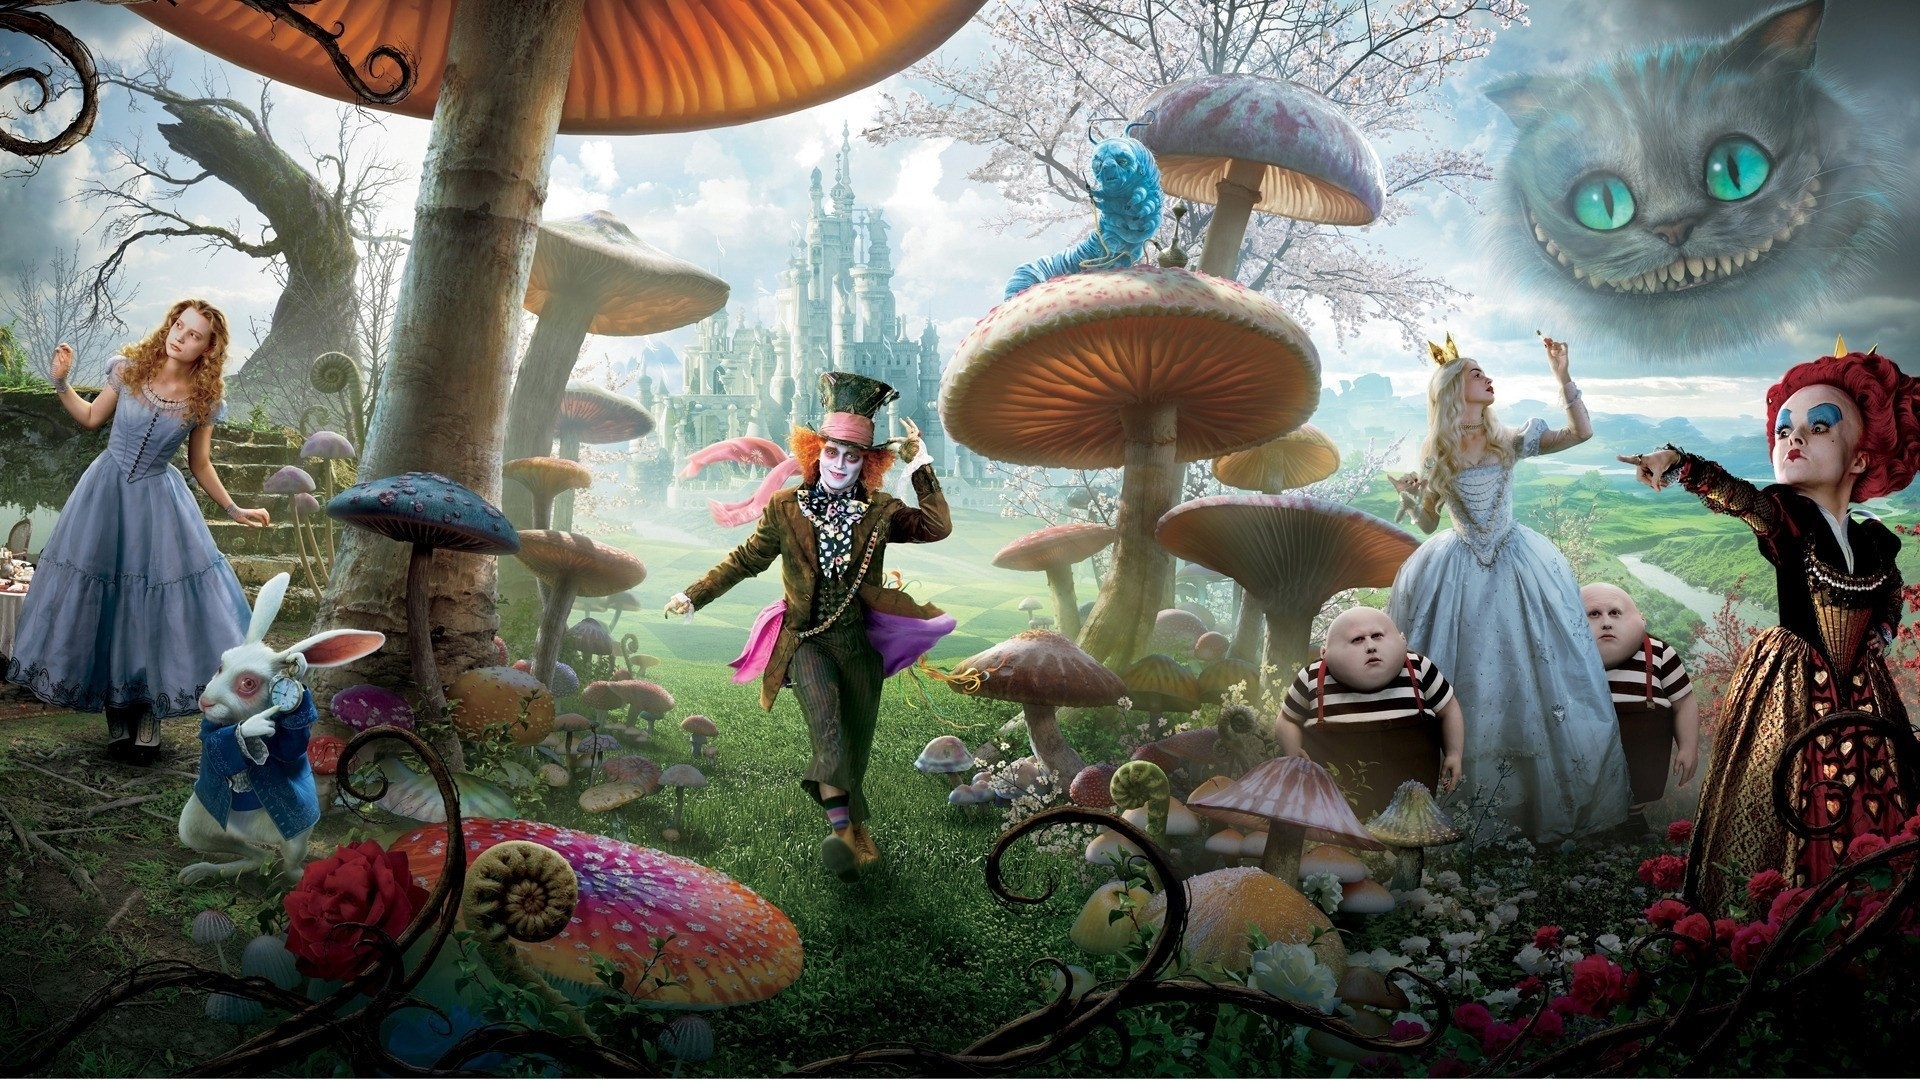 10 Top Alice In Wonderland Wallpaper FULL HD 1920×1080 For PC Background